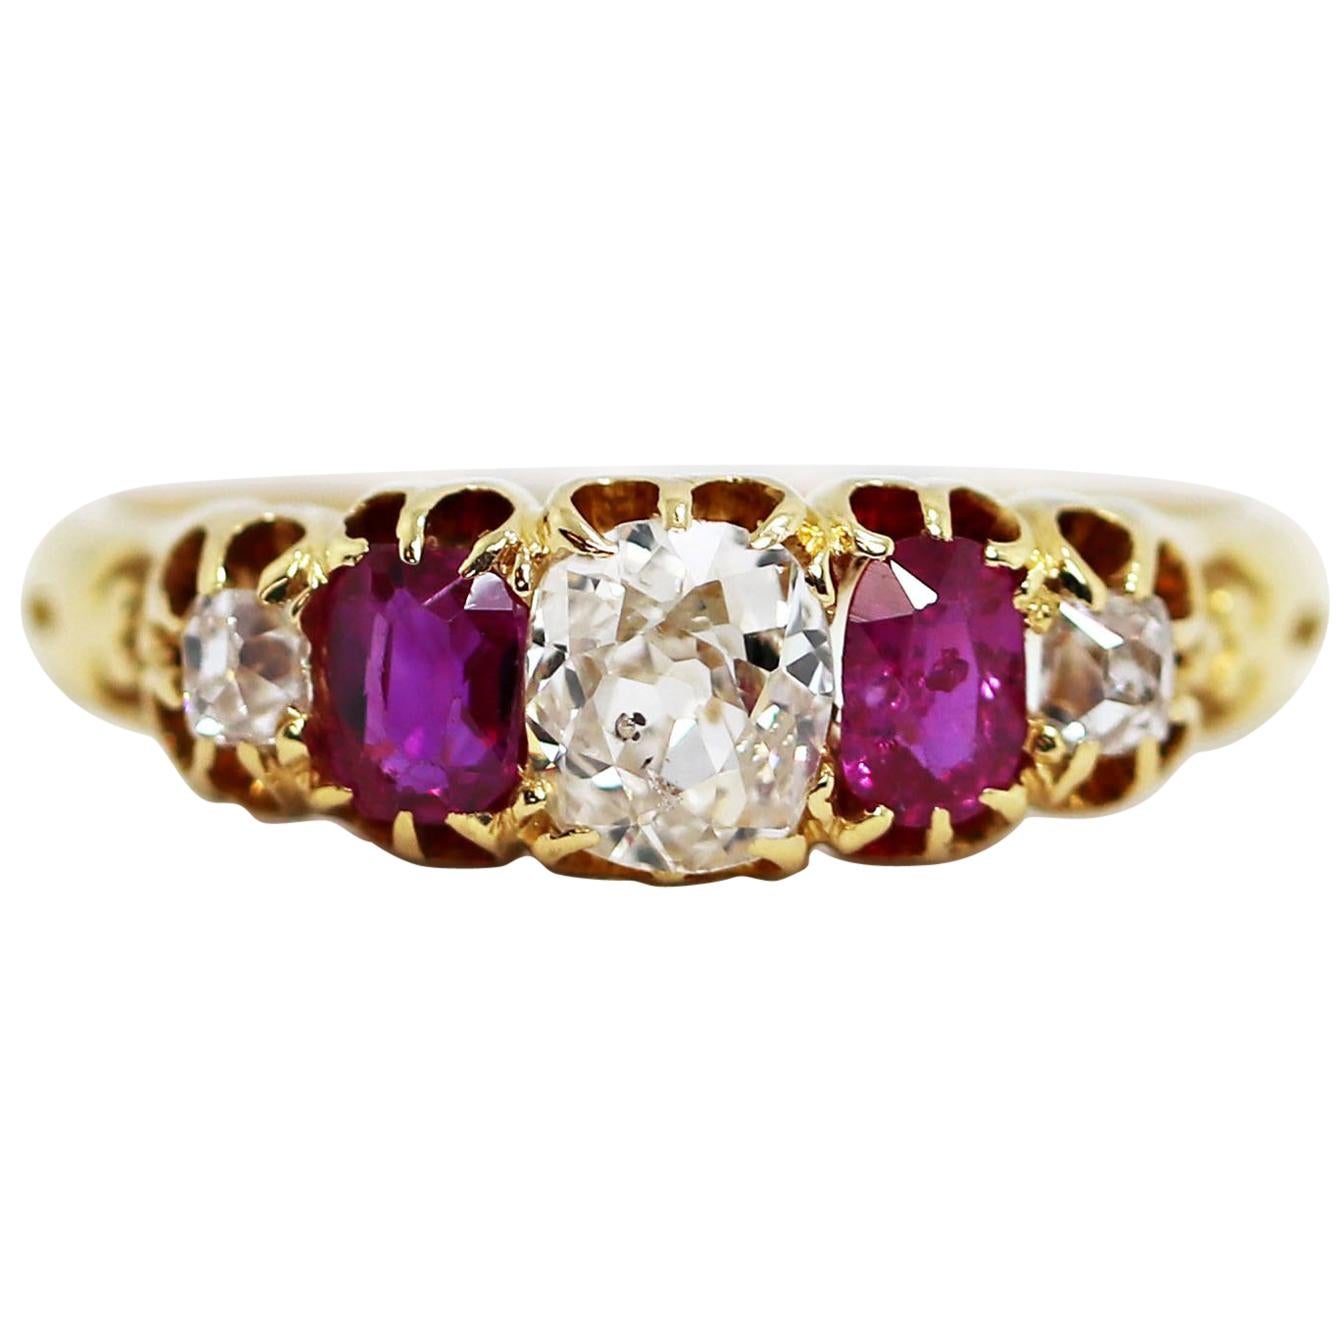 Antique 5-Stone Ruby and Old Cut Diamond Ring, circa 1880